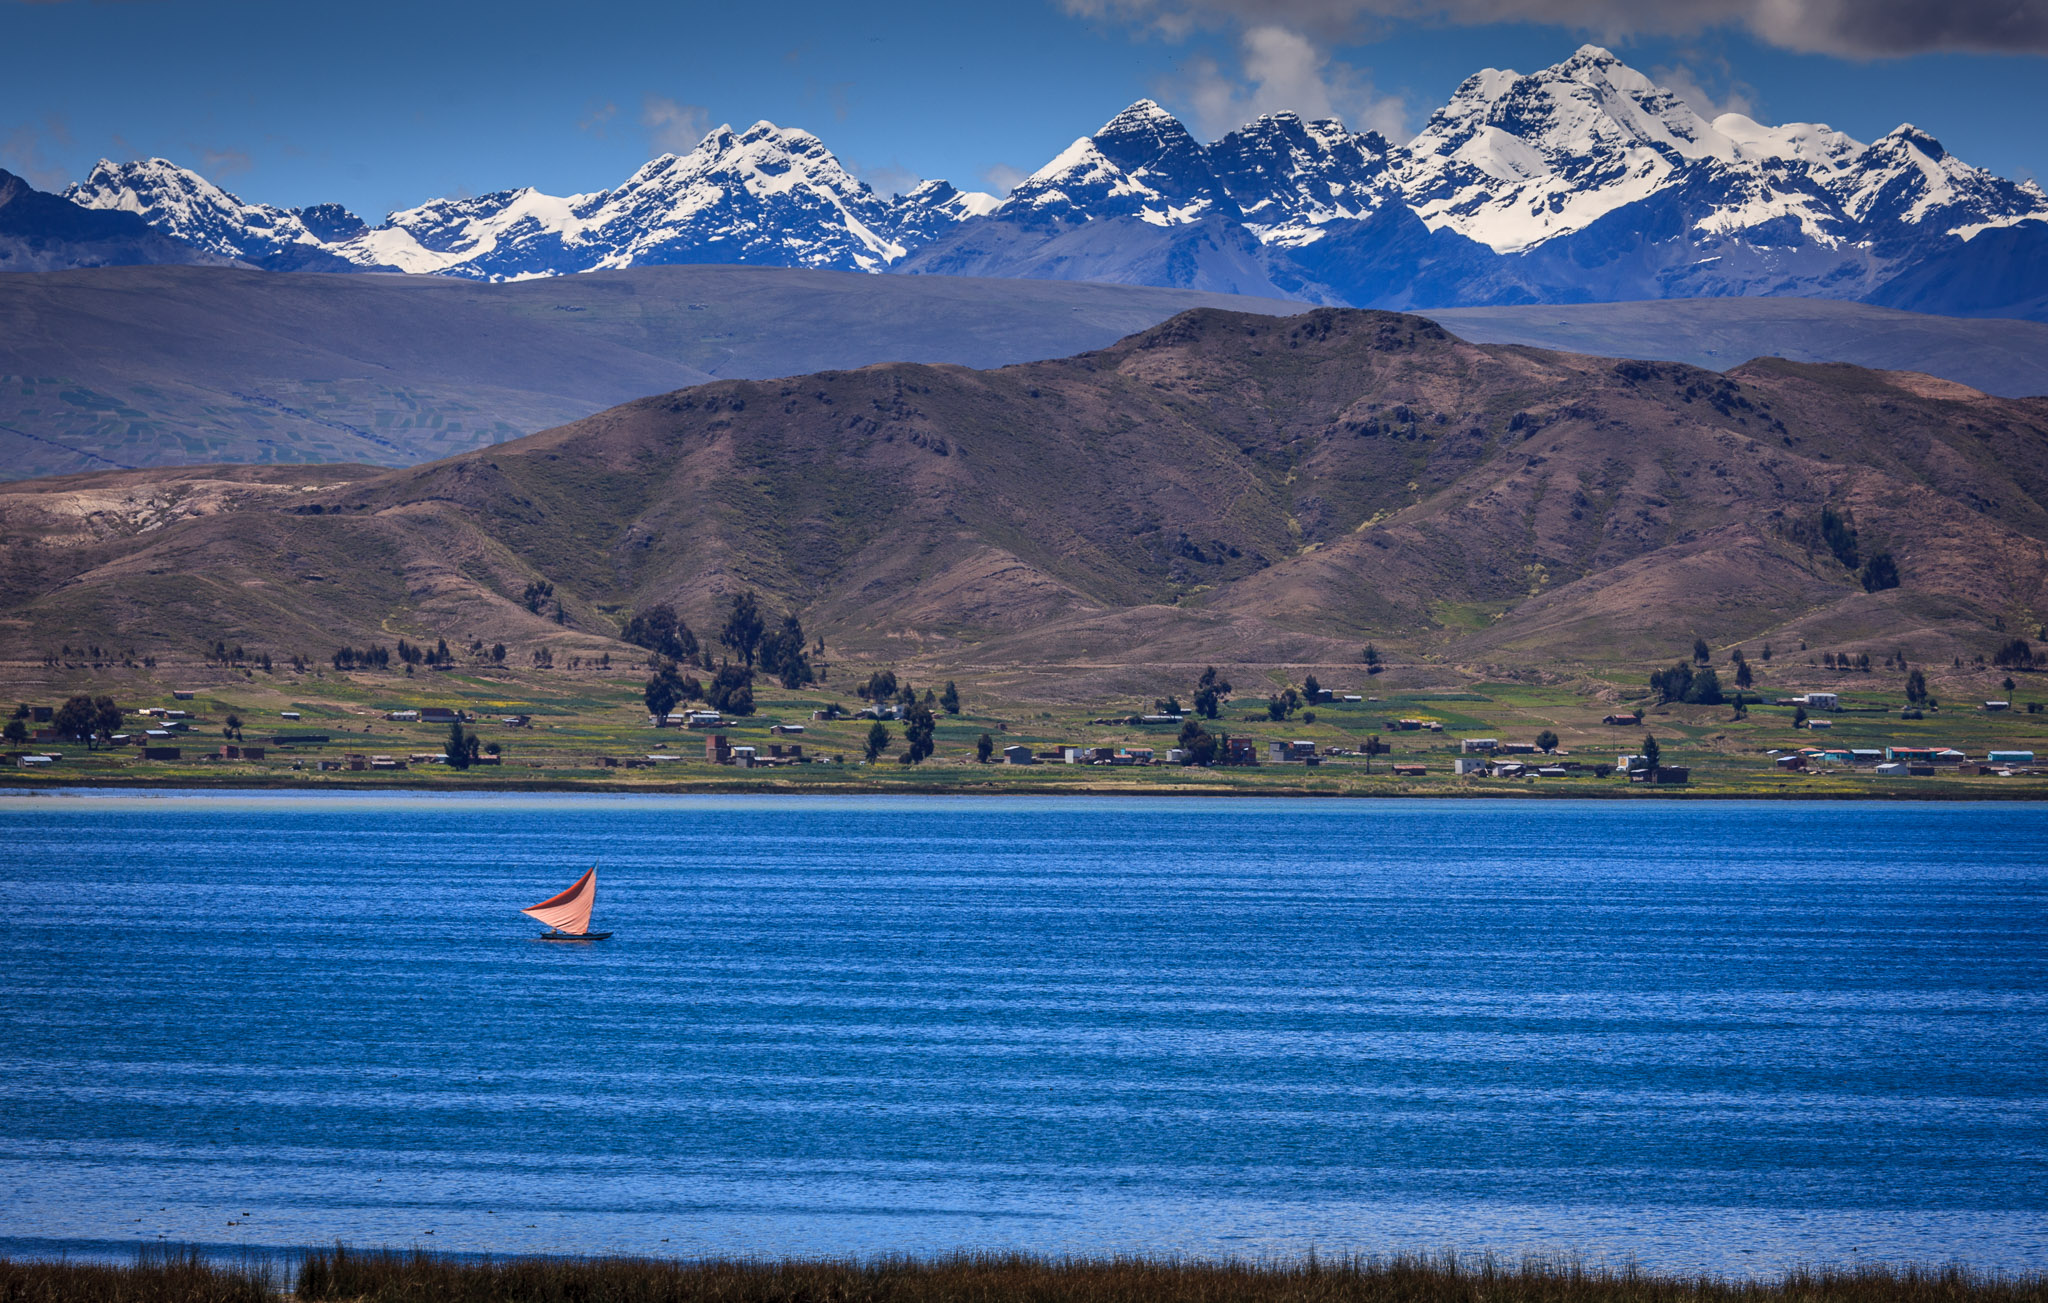 20,000' Andes loom over Lake Titicaca